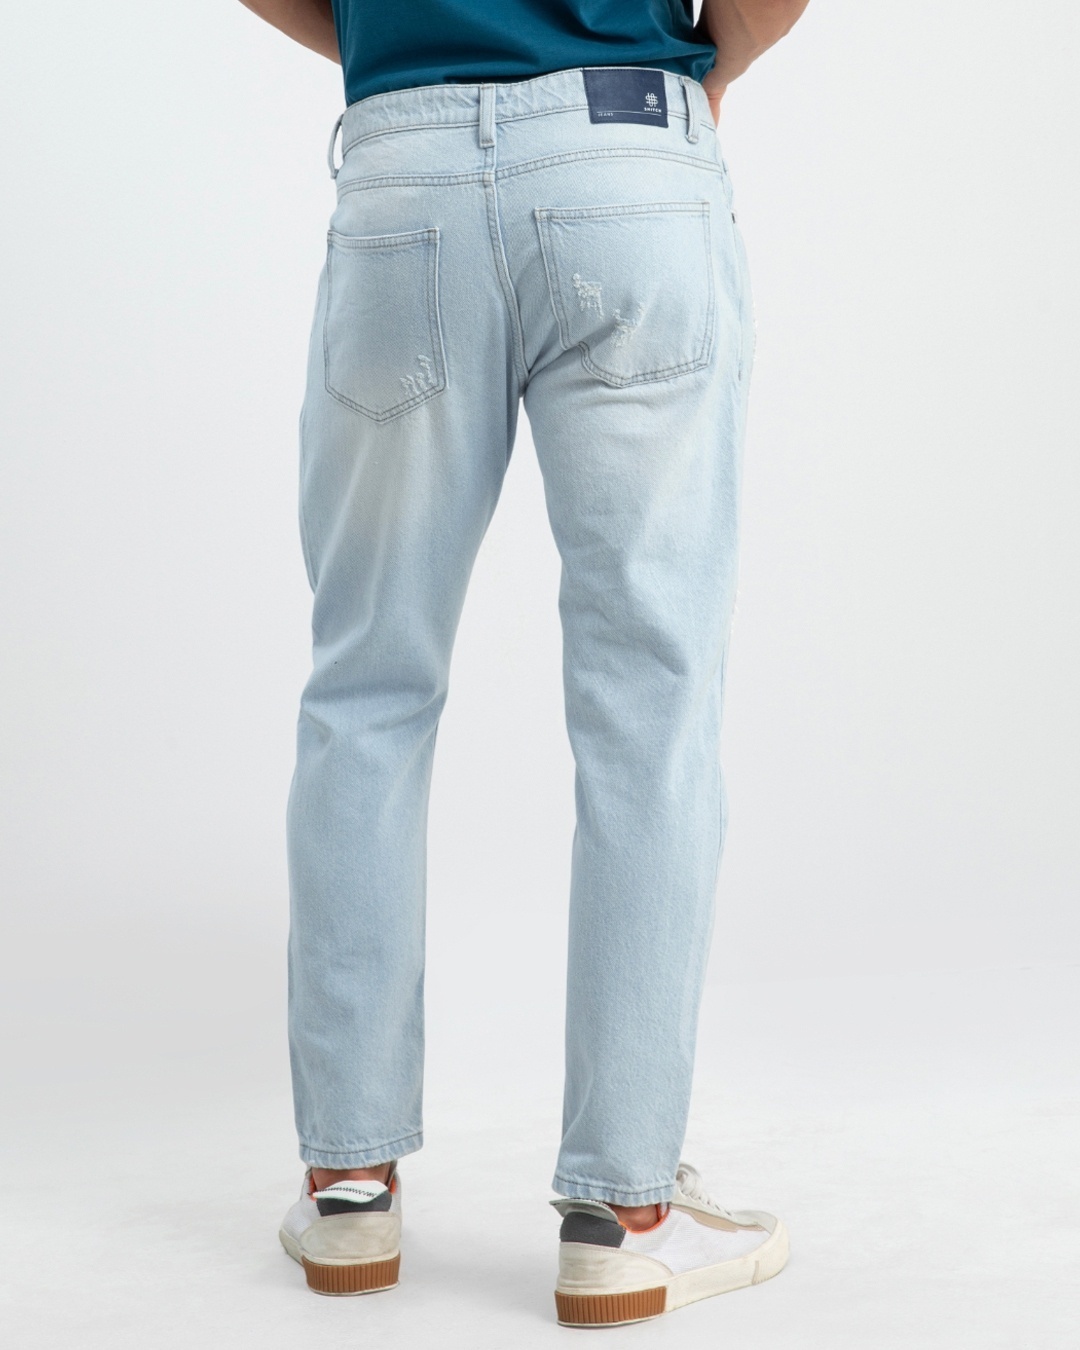 Buy Men's Blue Distressed Relaxed Fit Jeans for Men Blue Online at Bewakoof